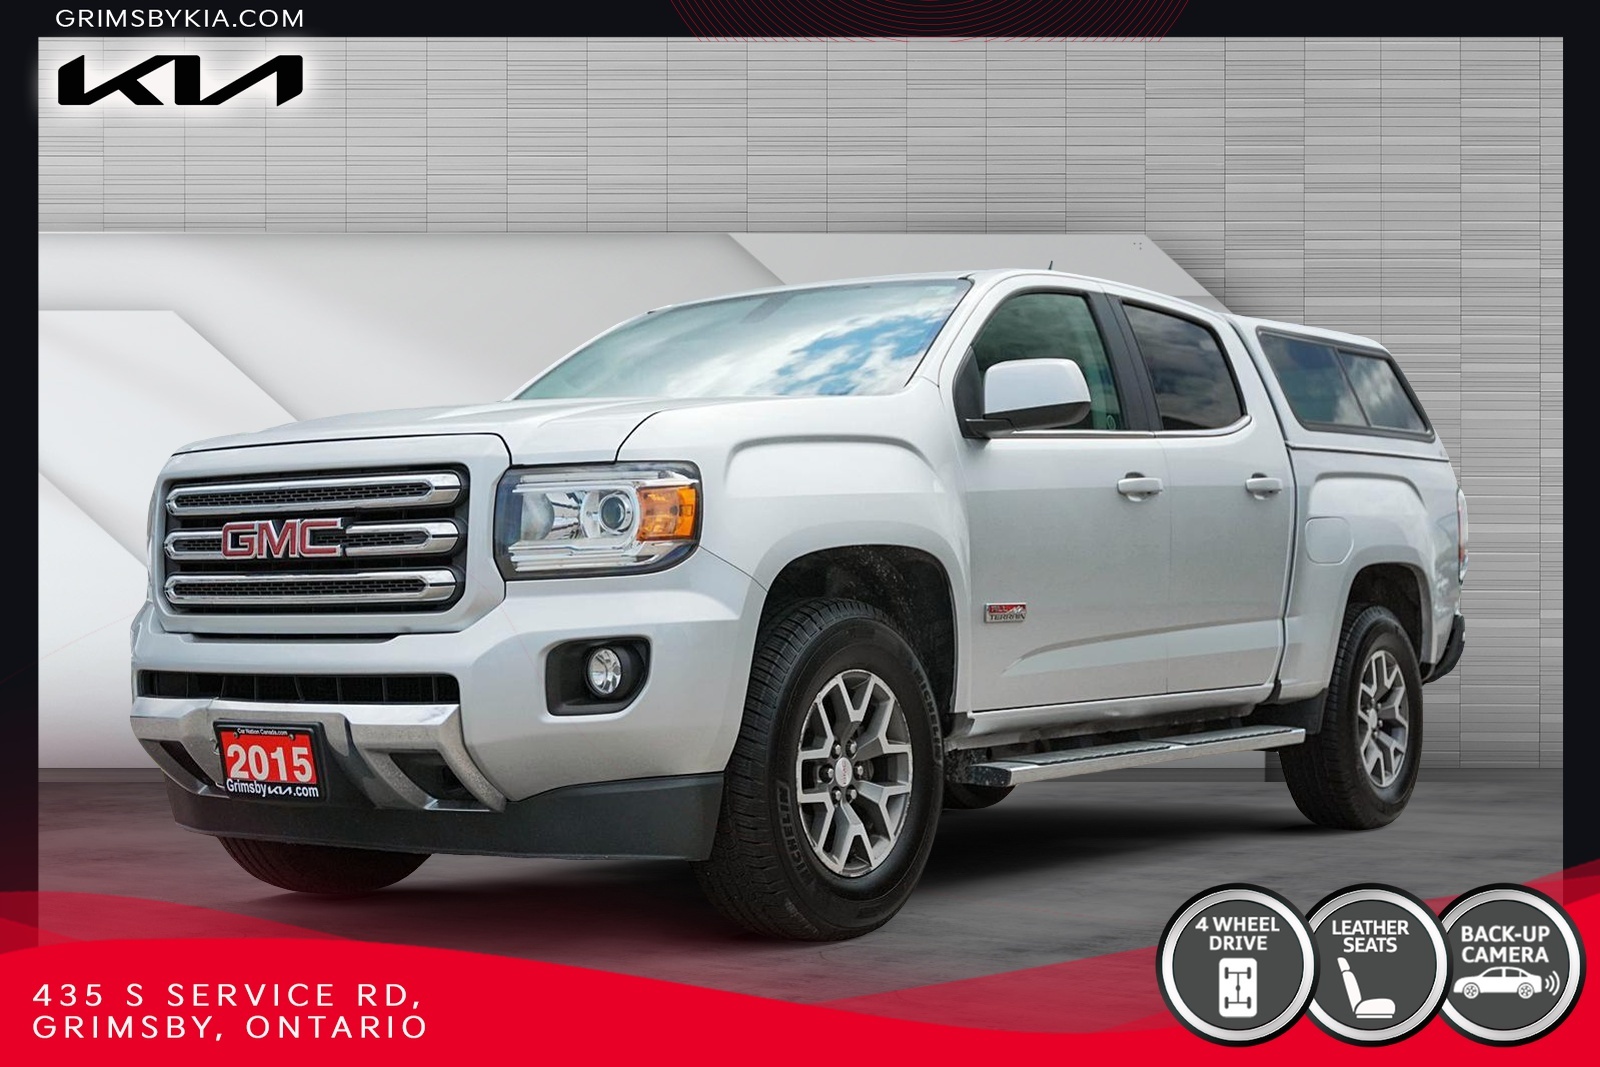 2015 GMC Canyon SLT AT4 | 4WD | LEATHER